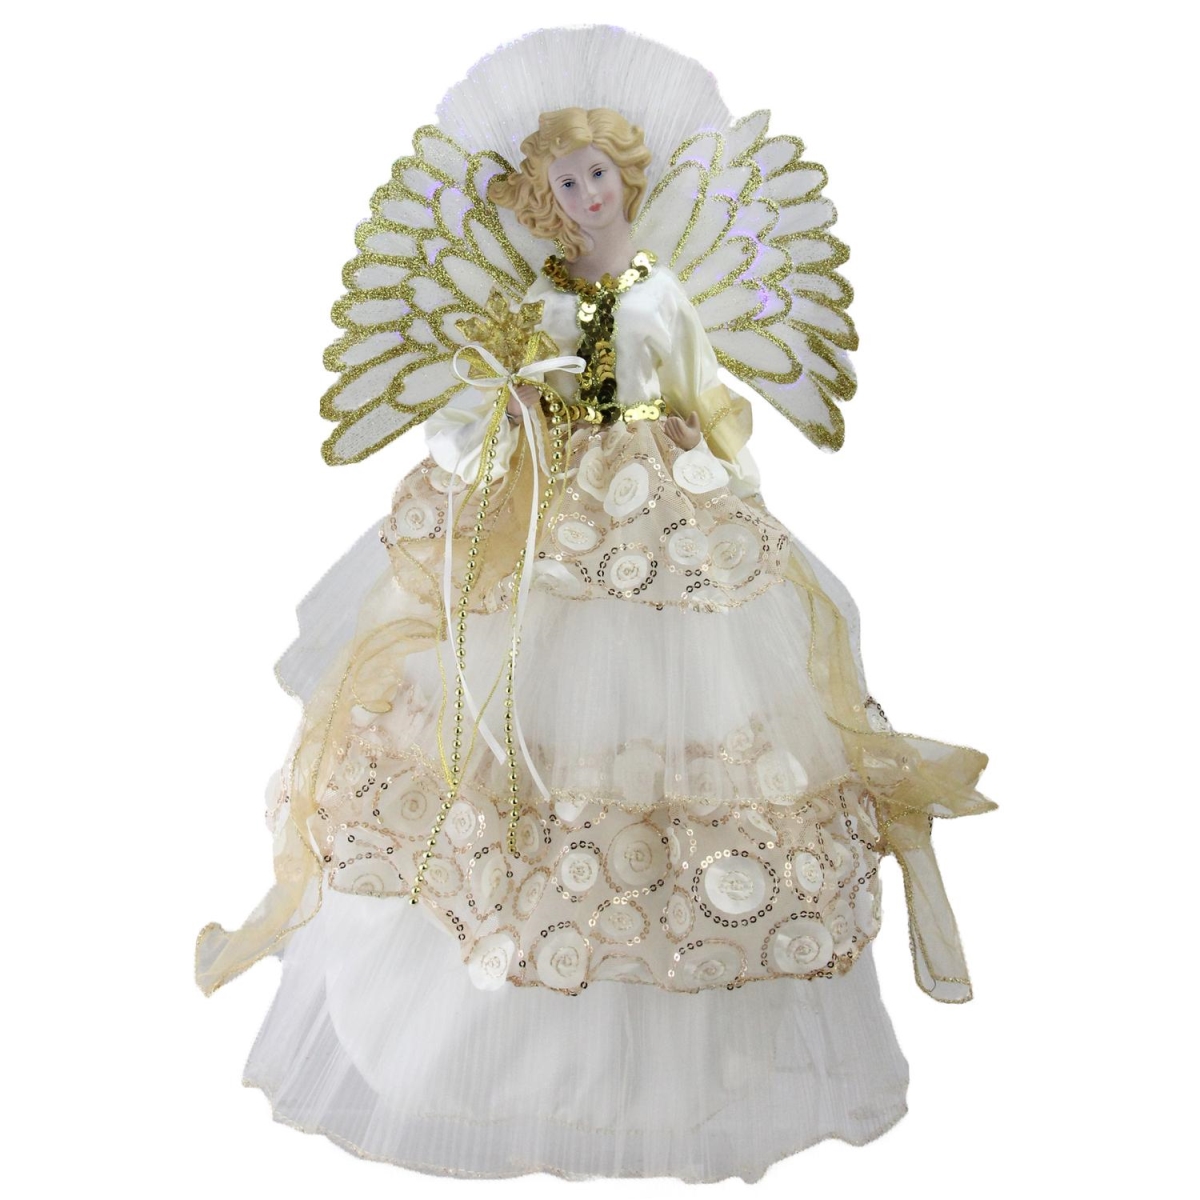 Picture of Northlight 32623686 12 in. Fiber Optic Angel in Gown Christmas Tree Topper, Gold & Cream